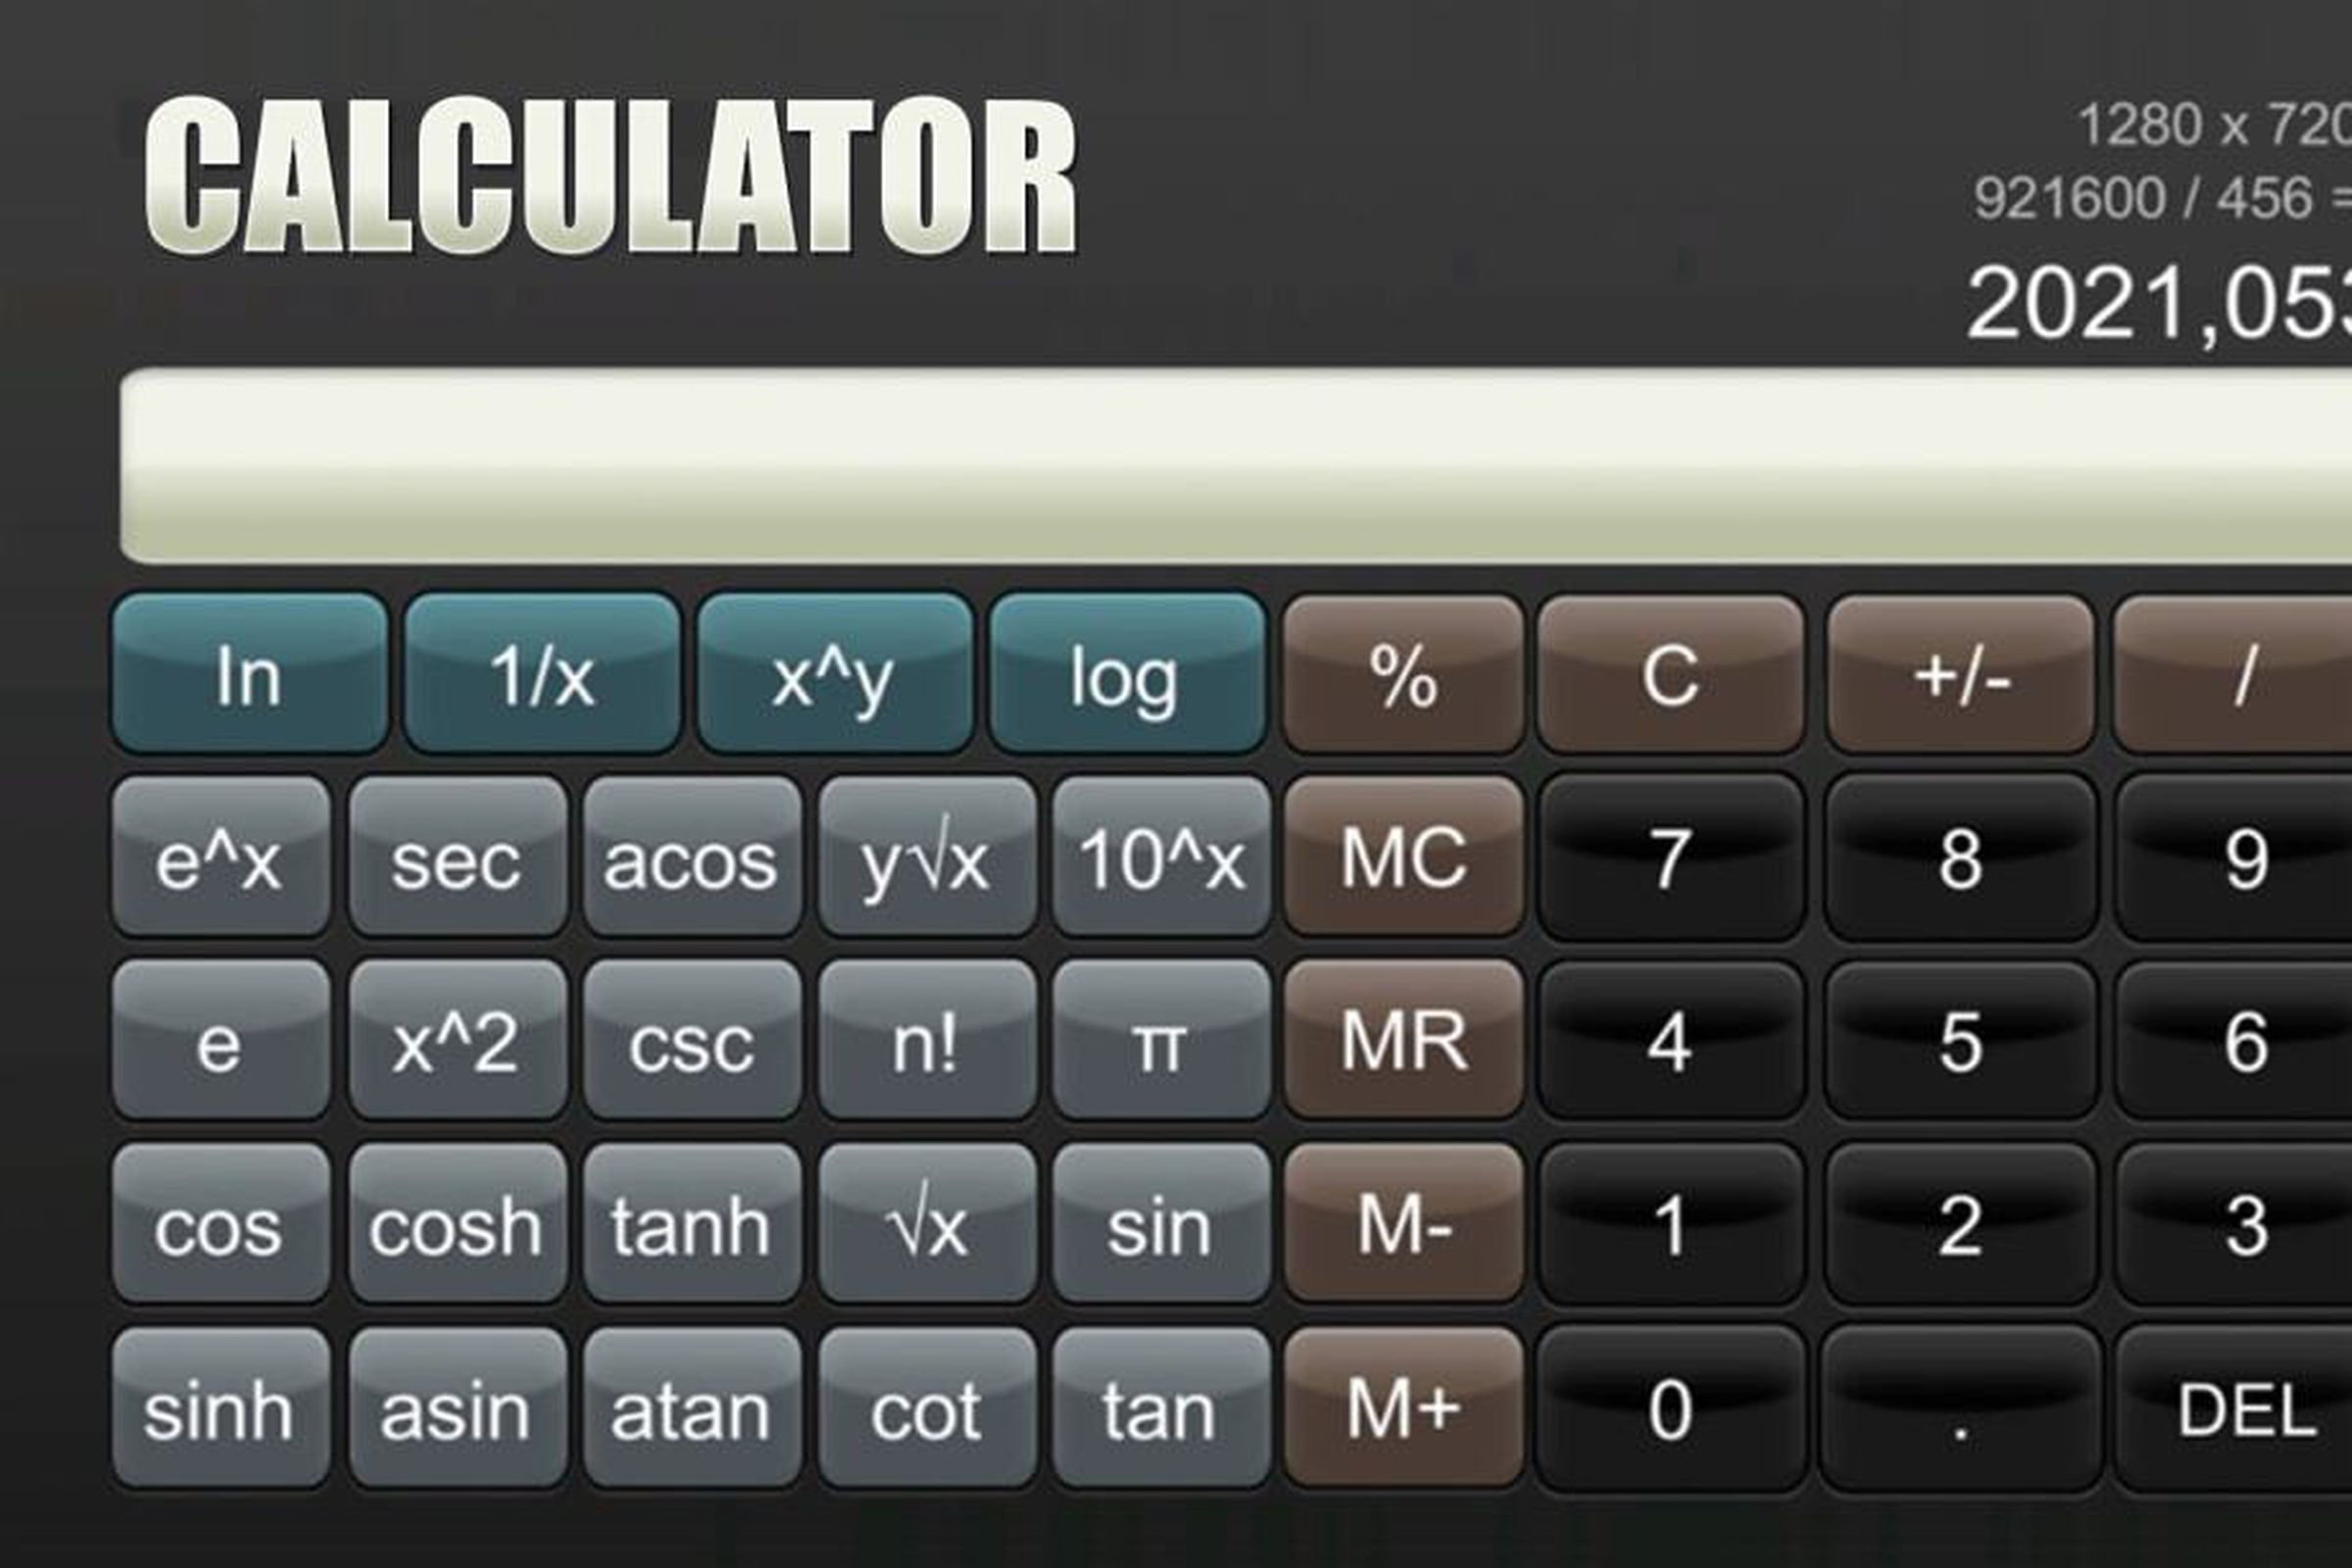 It features a similar design to the old iOS calculator app.